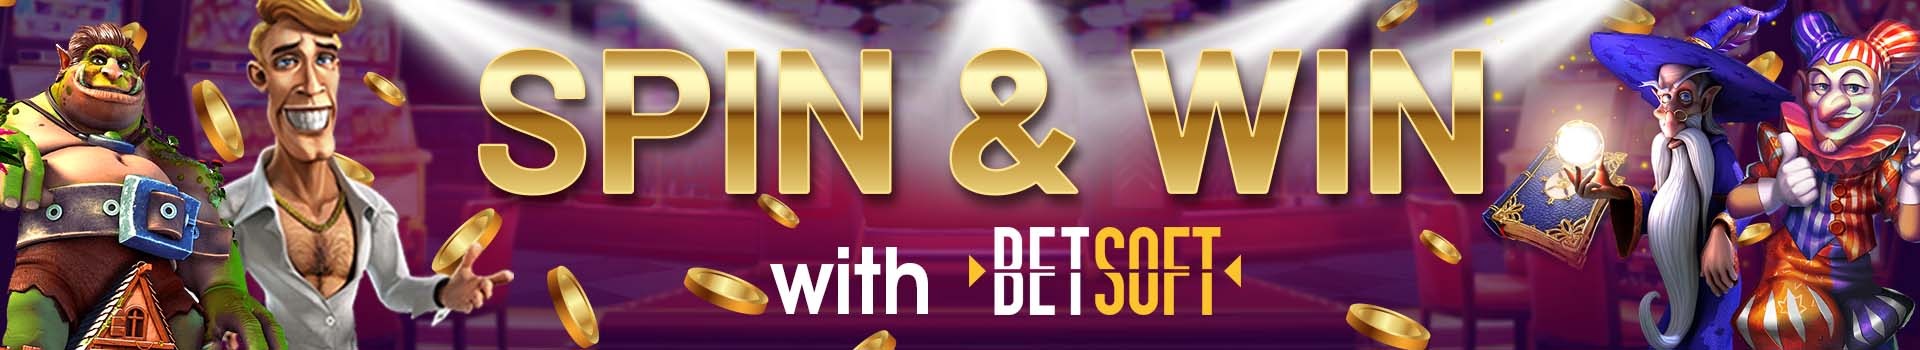 Spin And Win With Betsoft Banner